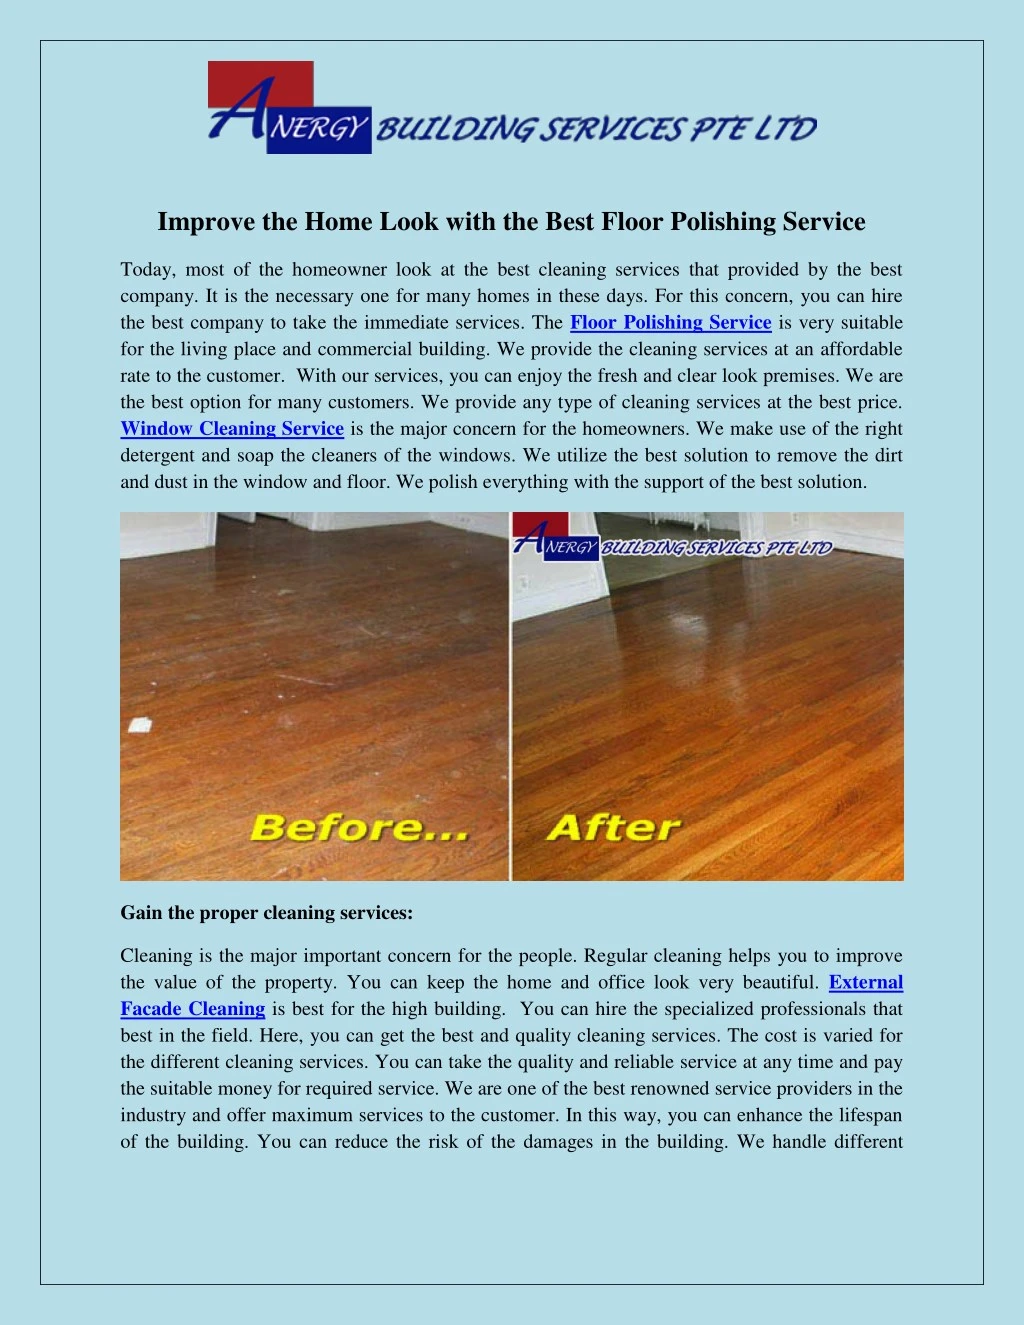 improve the home look with the best floor